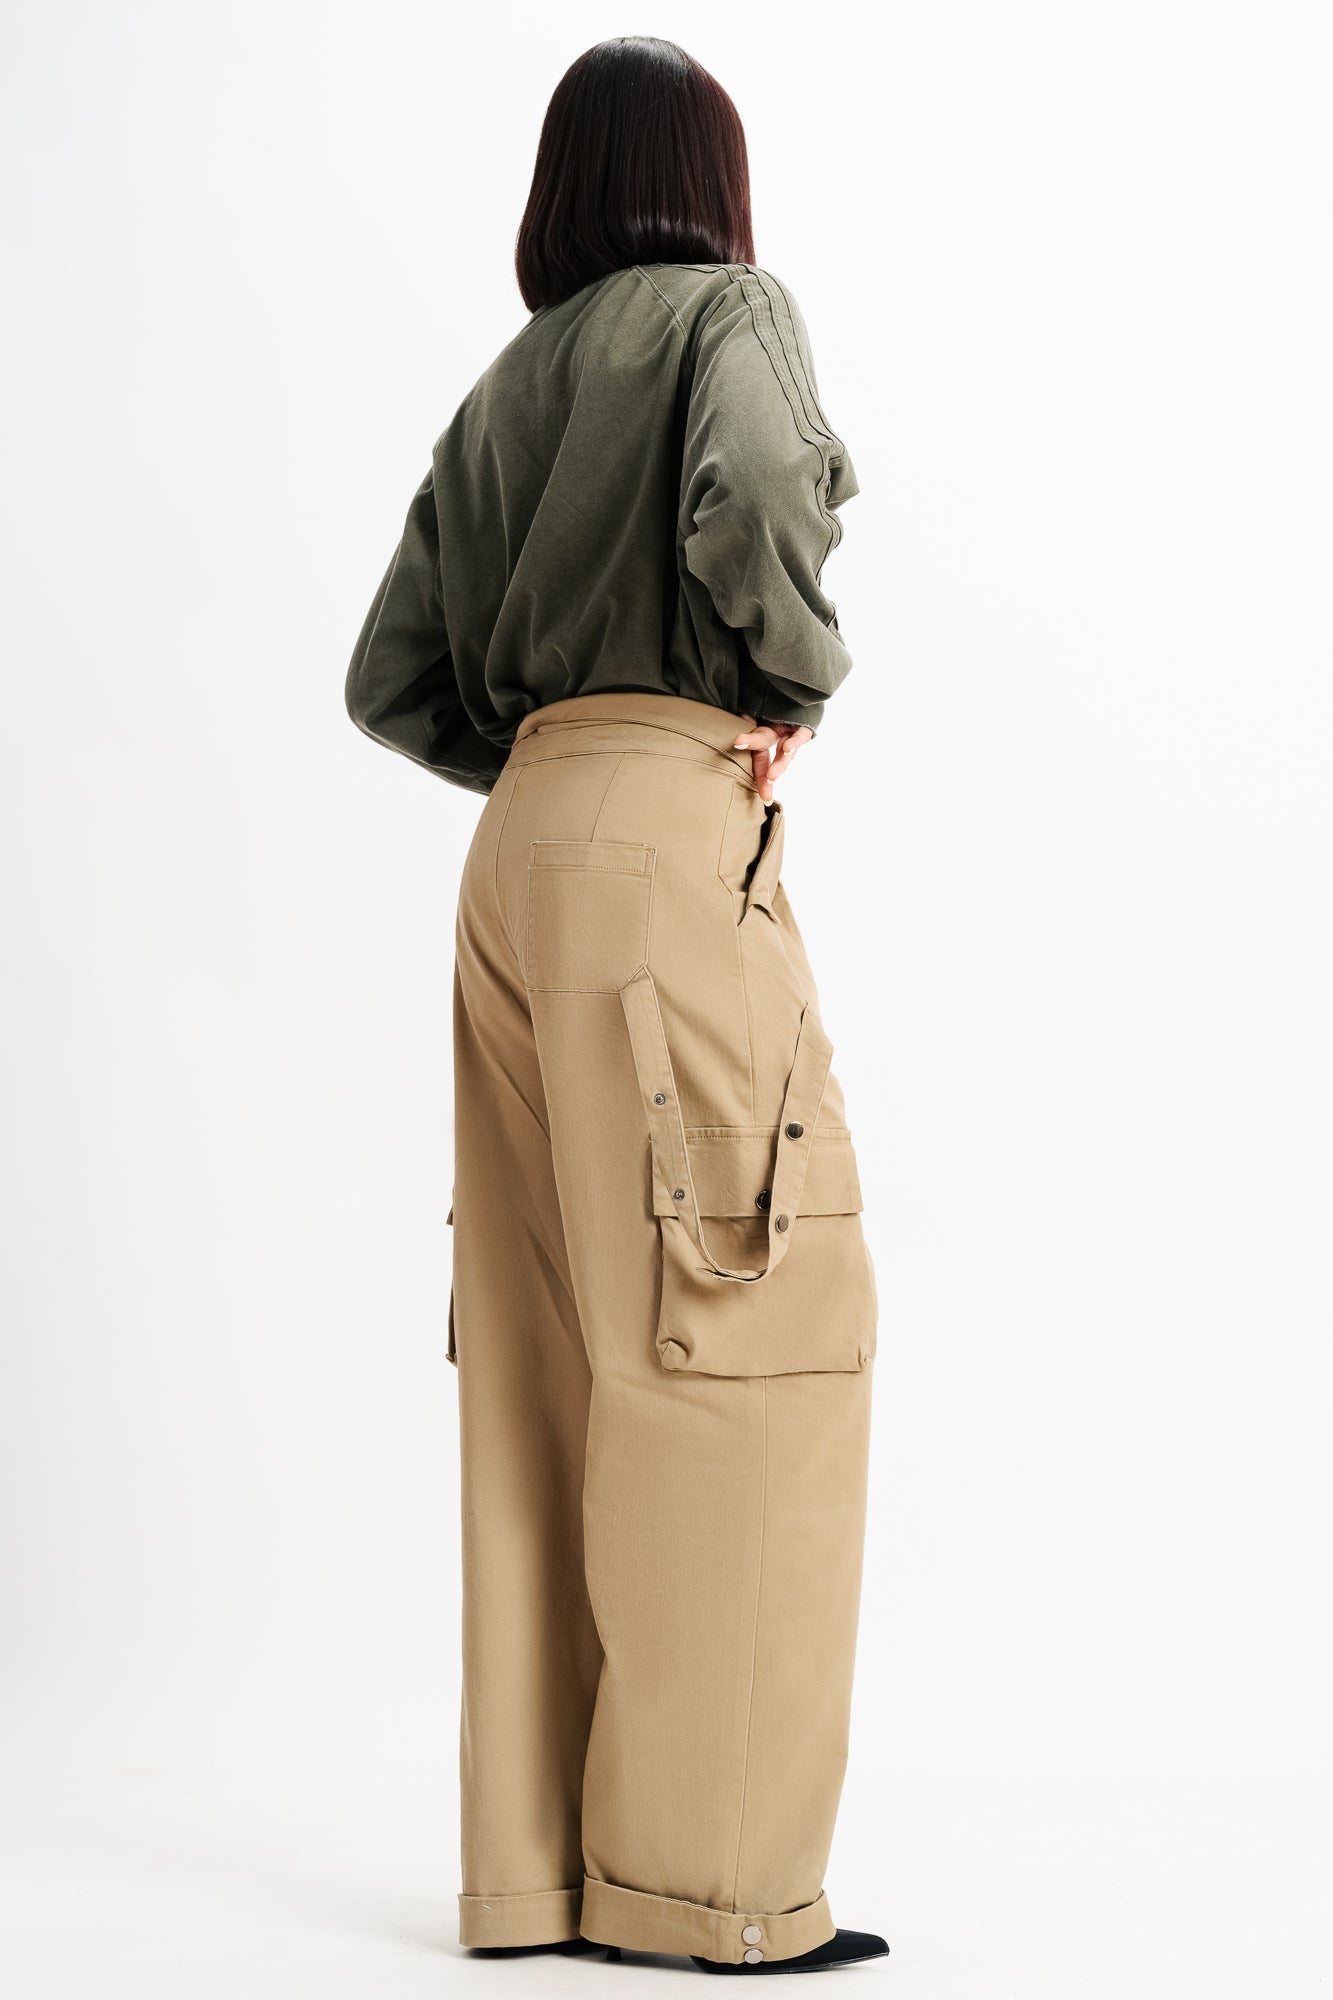 Buy Golden and Cream Combo of 2 Ankle Length Pants Taffeta Silk for Best  Price, Reviews, Free Shipping